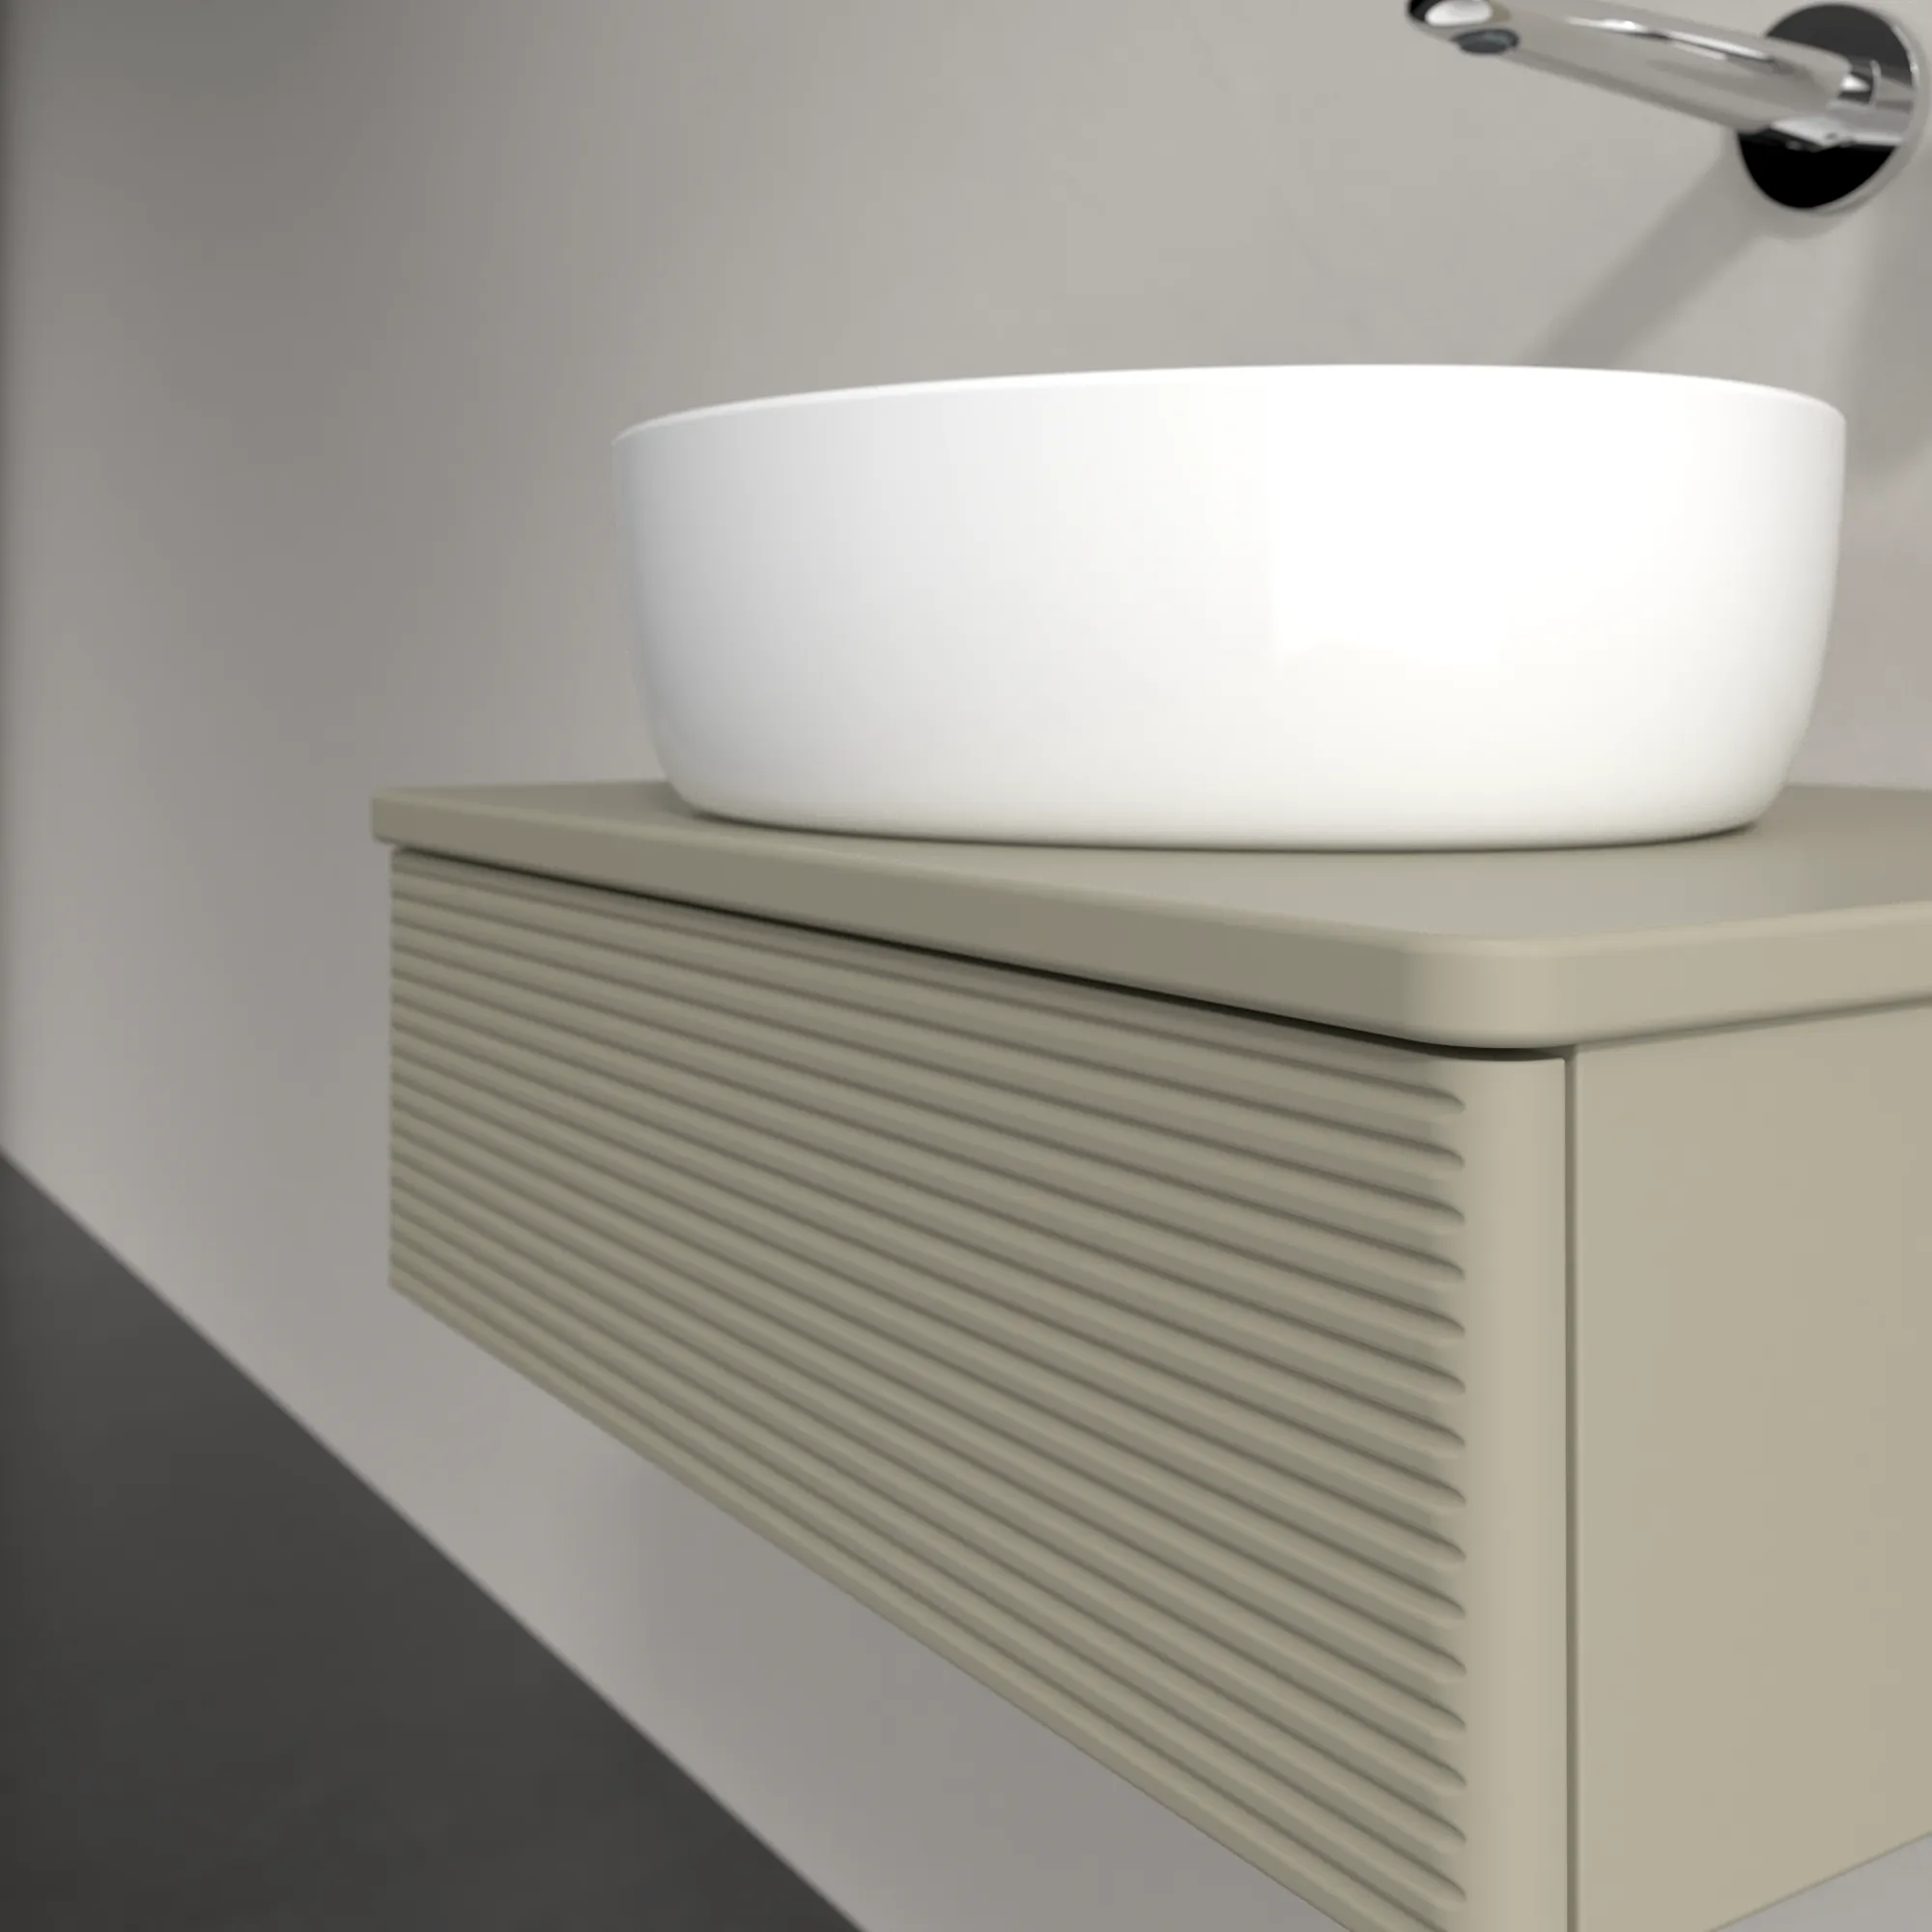 VILLEROY BOCH Antao Vanity unit, with lighting, 1 pull-out compartment, 600 x 190 x 500 mm, Front with grain texture, Stone Grey Matt Lacquer / Stone Grey Matt Lacquer #L07110HK resmi